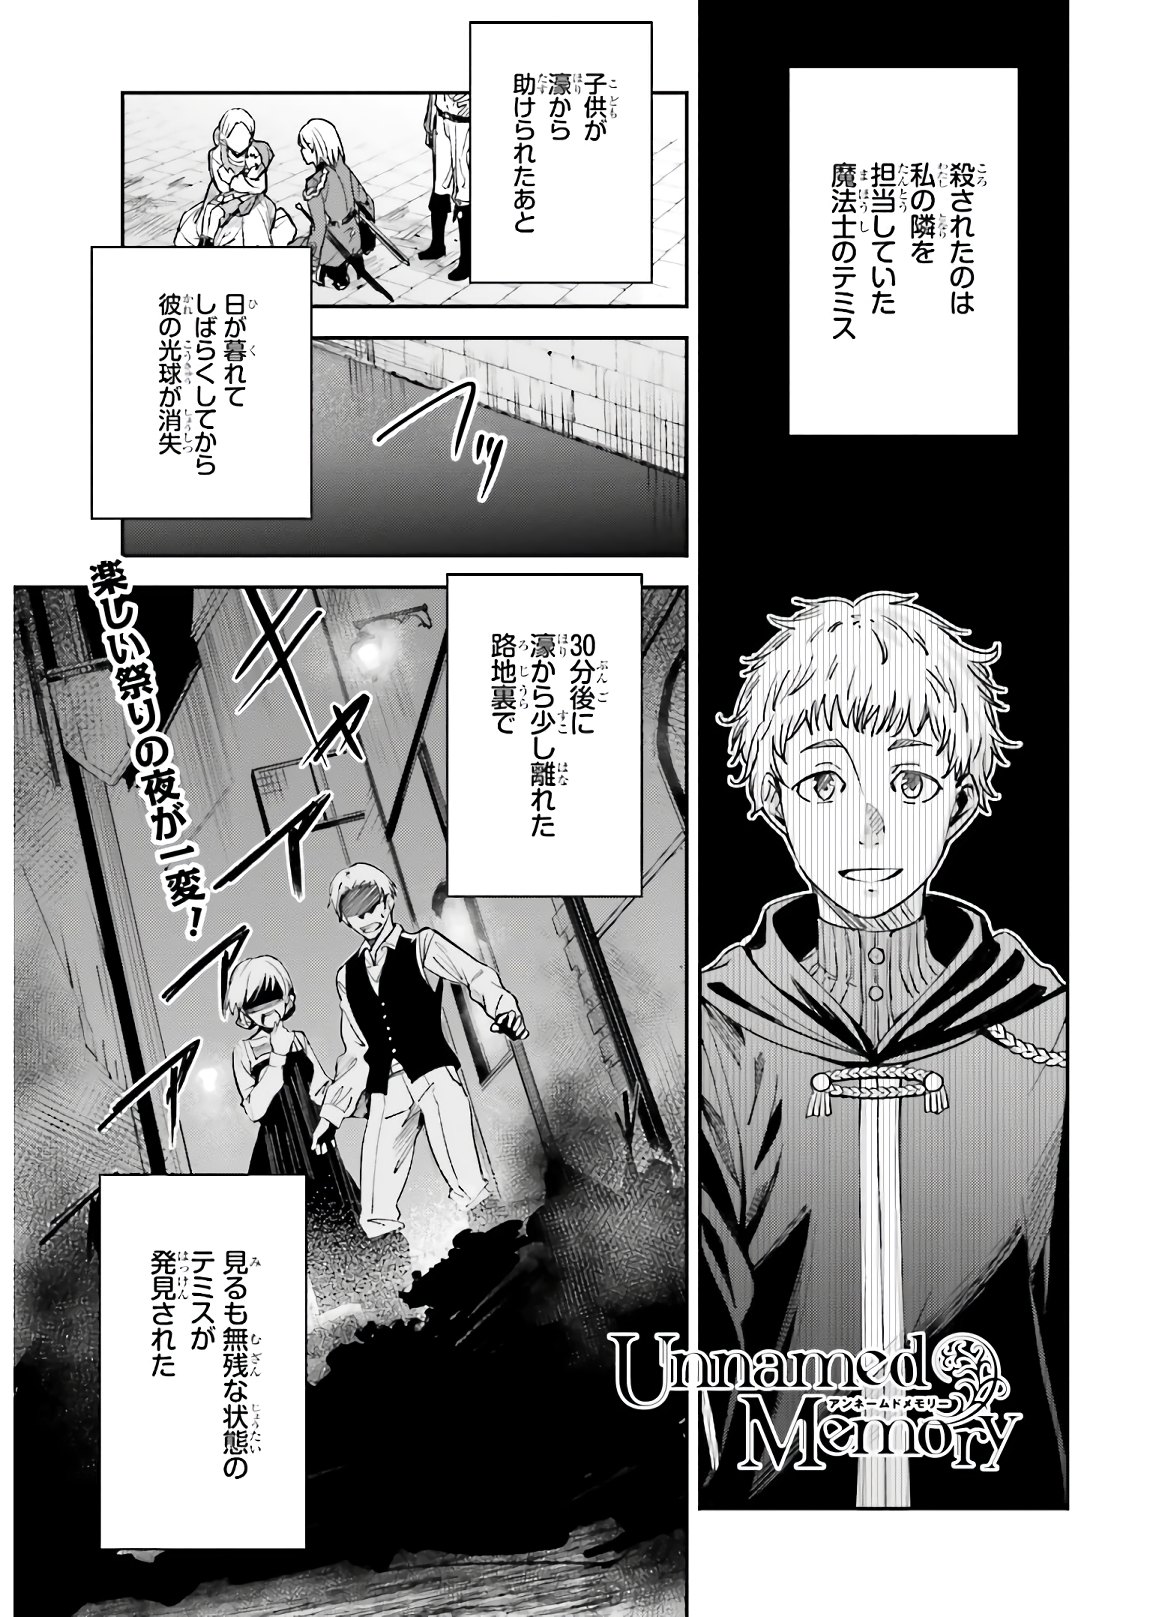 Unnamed Memory 第4話 - Page 1